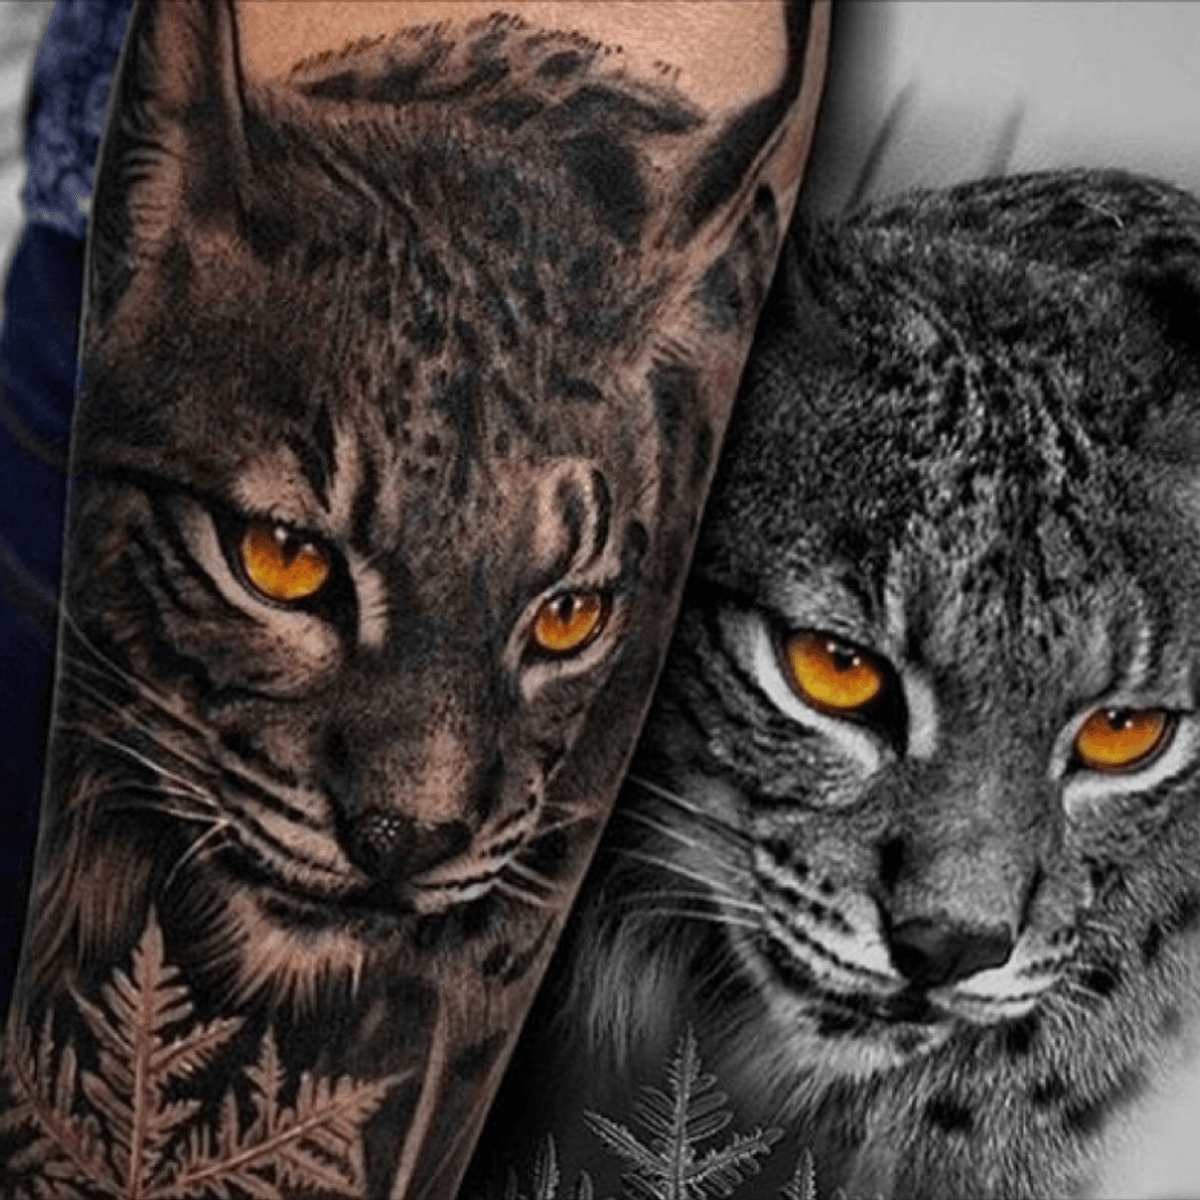 Tattoo uploaded by SkullBoy • Love this subtle addition of colour in this  black & grey tattoo. Will go with a similar thing on my chestpiece thursday  #blackandgrey #splashofcolour #colour #animal #lynx #